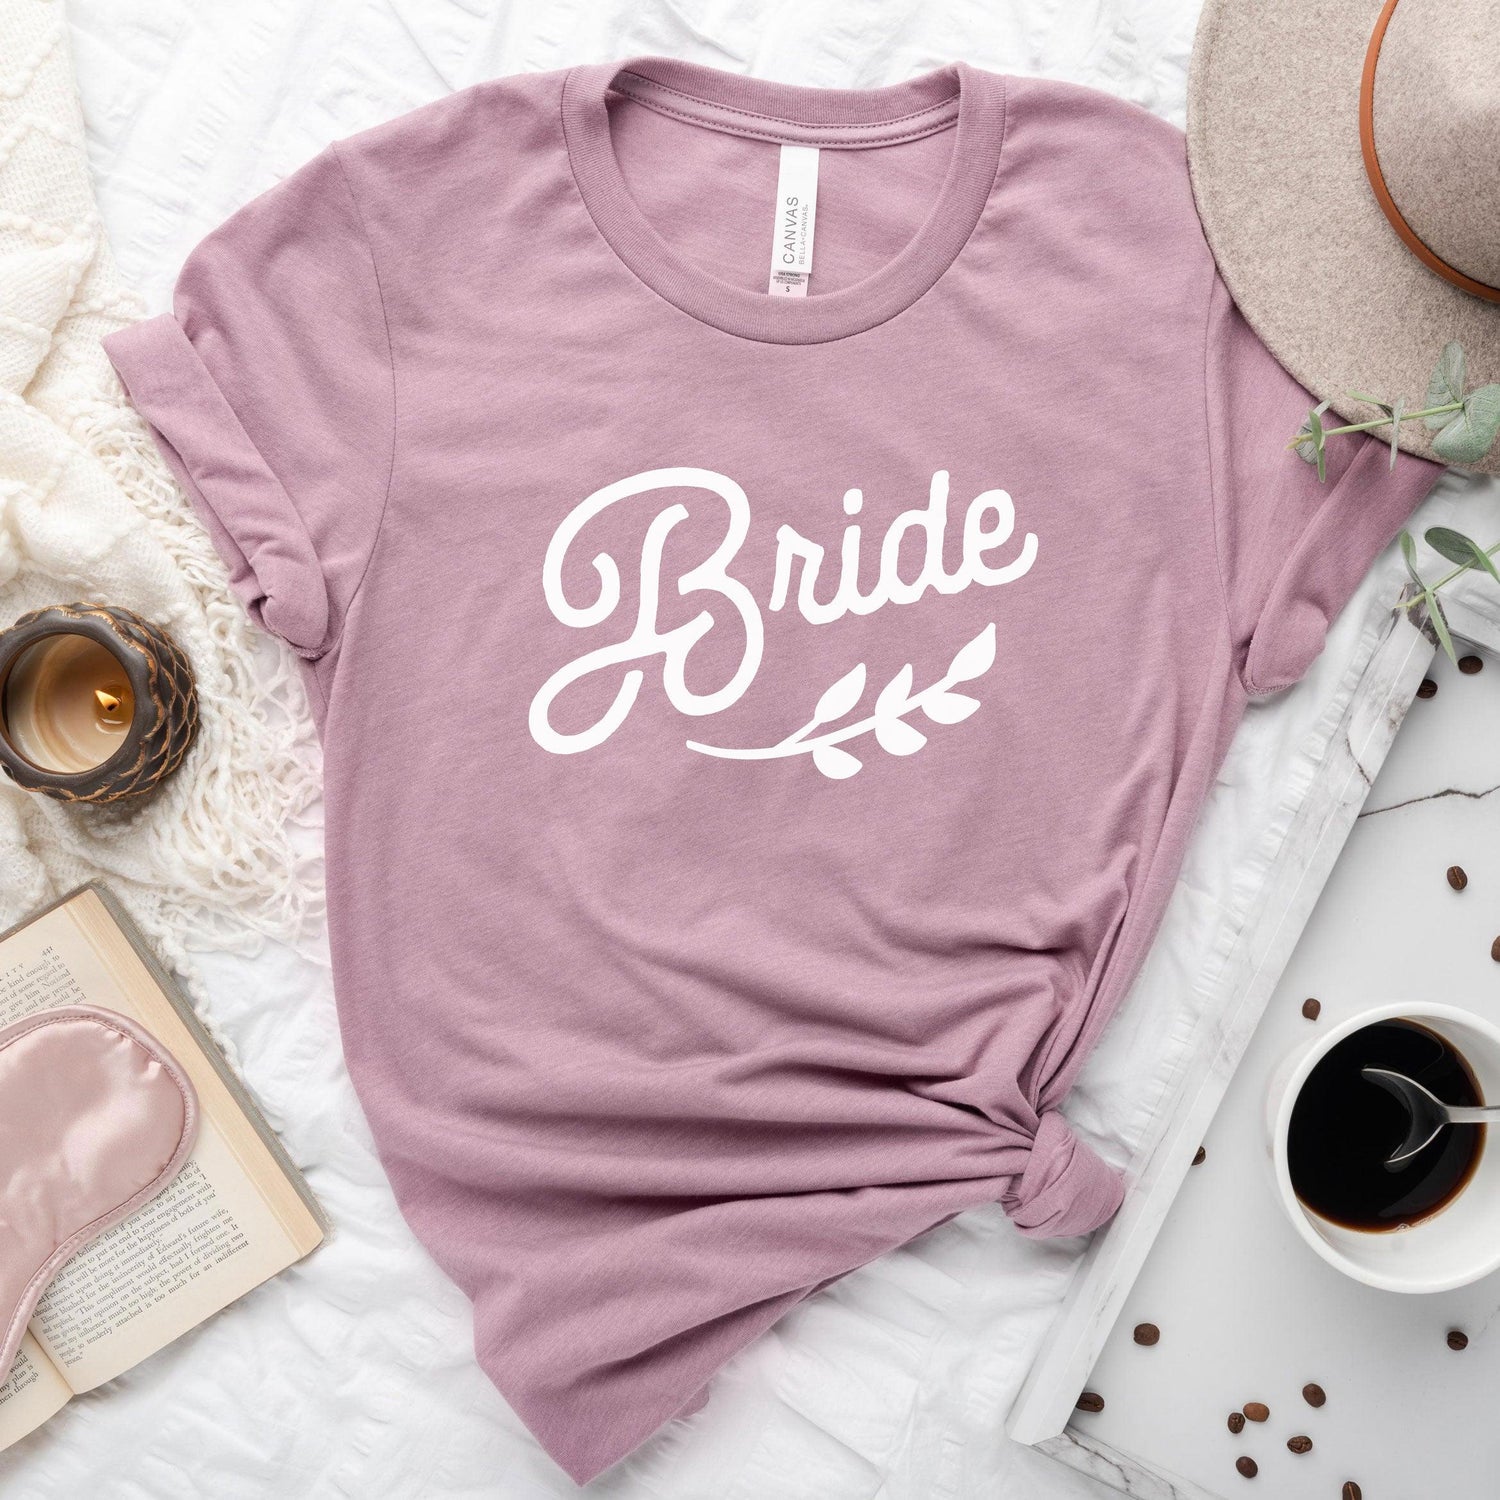 Bride - Wedding Party Short-Sleeve Tee - Plus Sizes Available by Oaklynn Lane - Dusty Rose Shirt